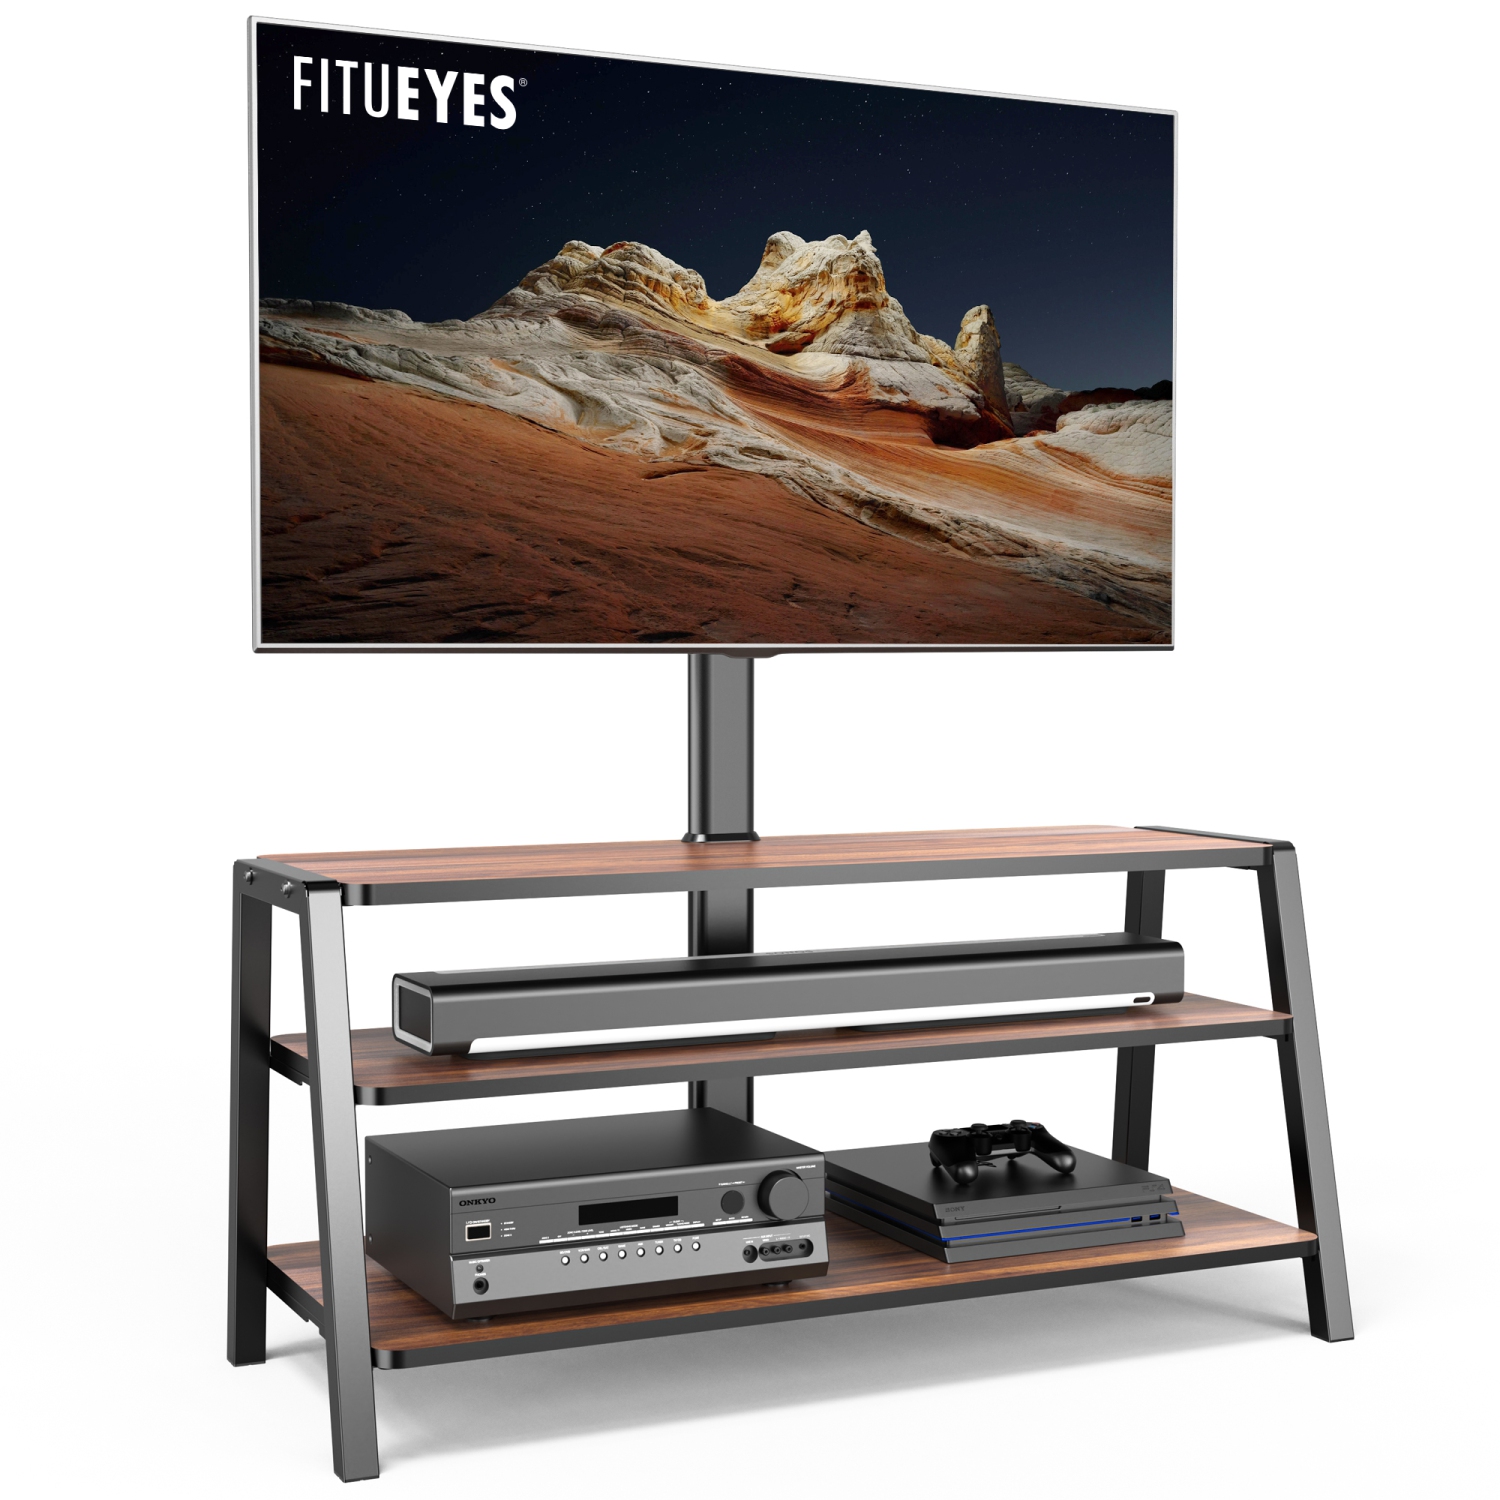 FITUEYES 3-Tier Floor TV Stand for 37-70 Inch TVs Entertainment Stand with Storage-Height Adjustable TV Console Stands with Golden Walnut Board & Cable Management, VESA 600x400mm